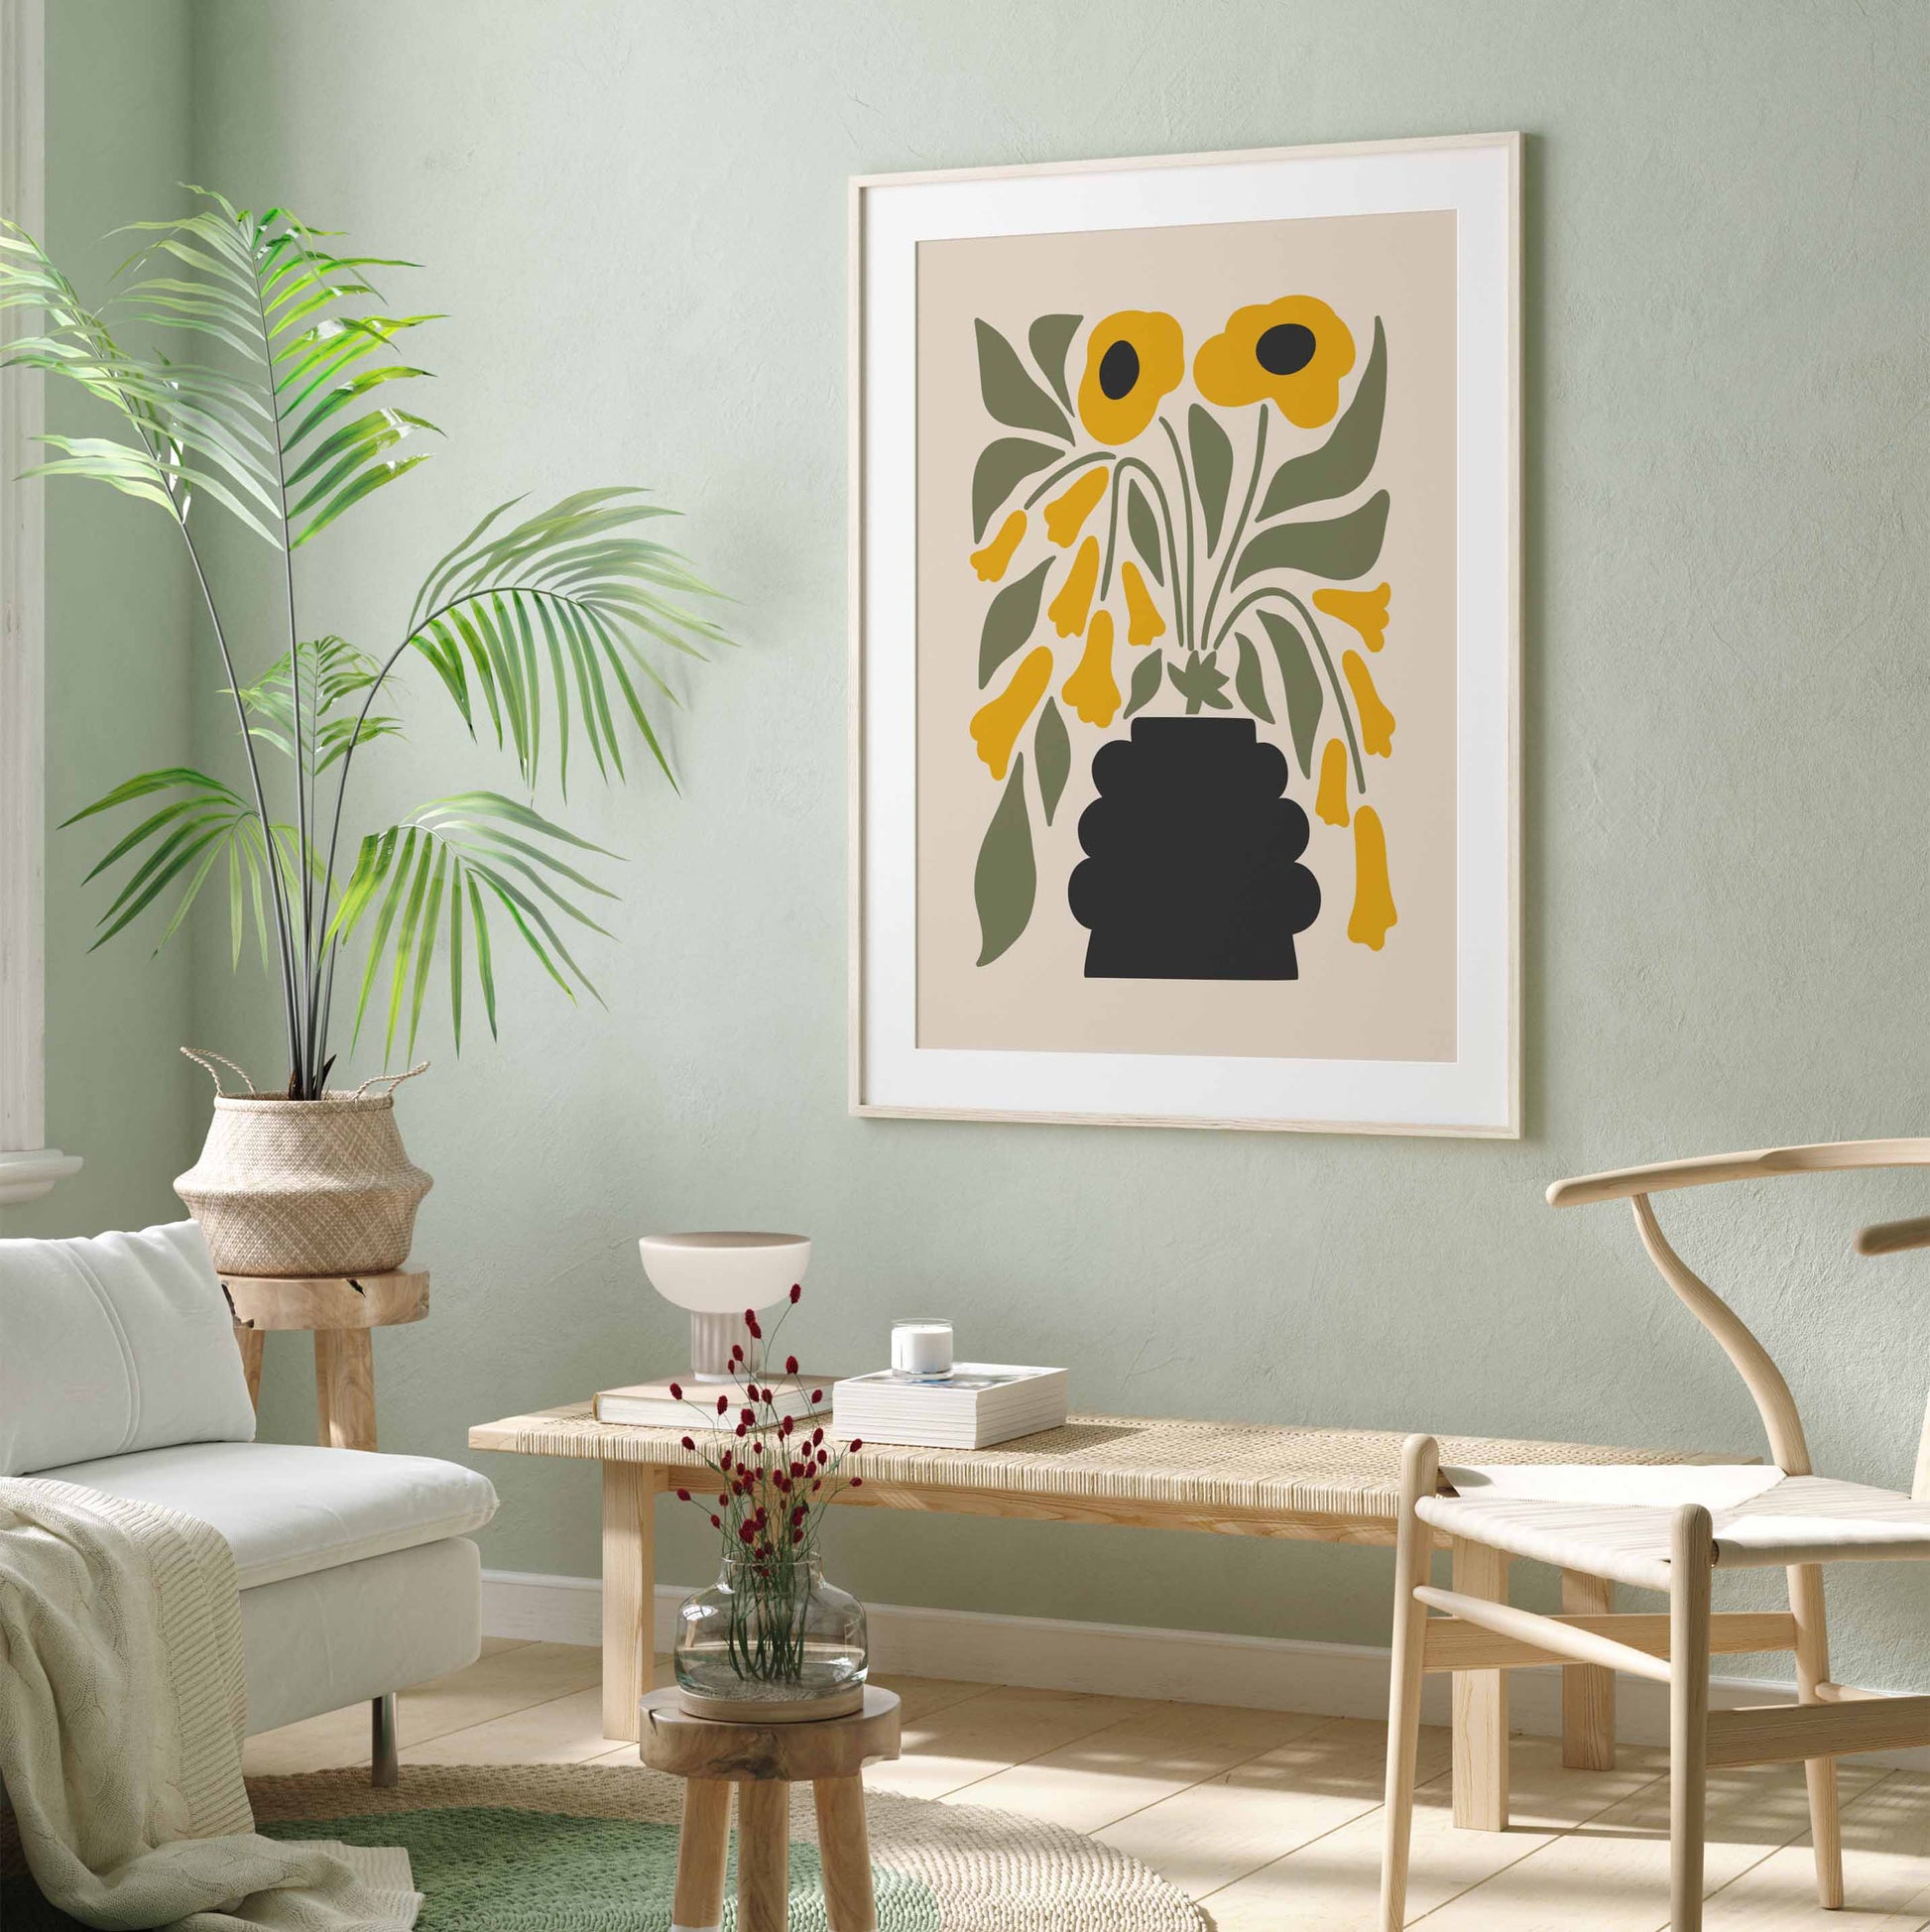 Green and yellow flower art print in a minimalist style